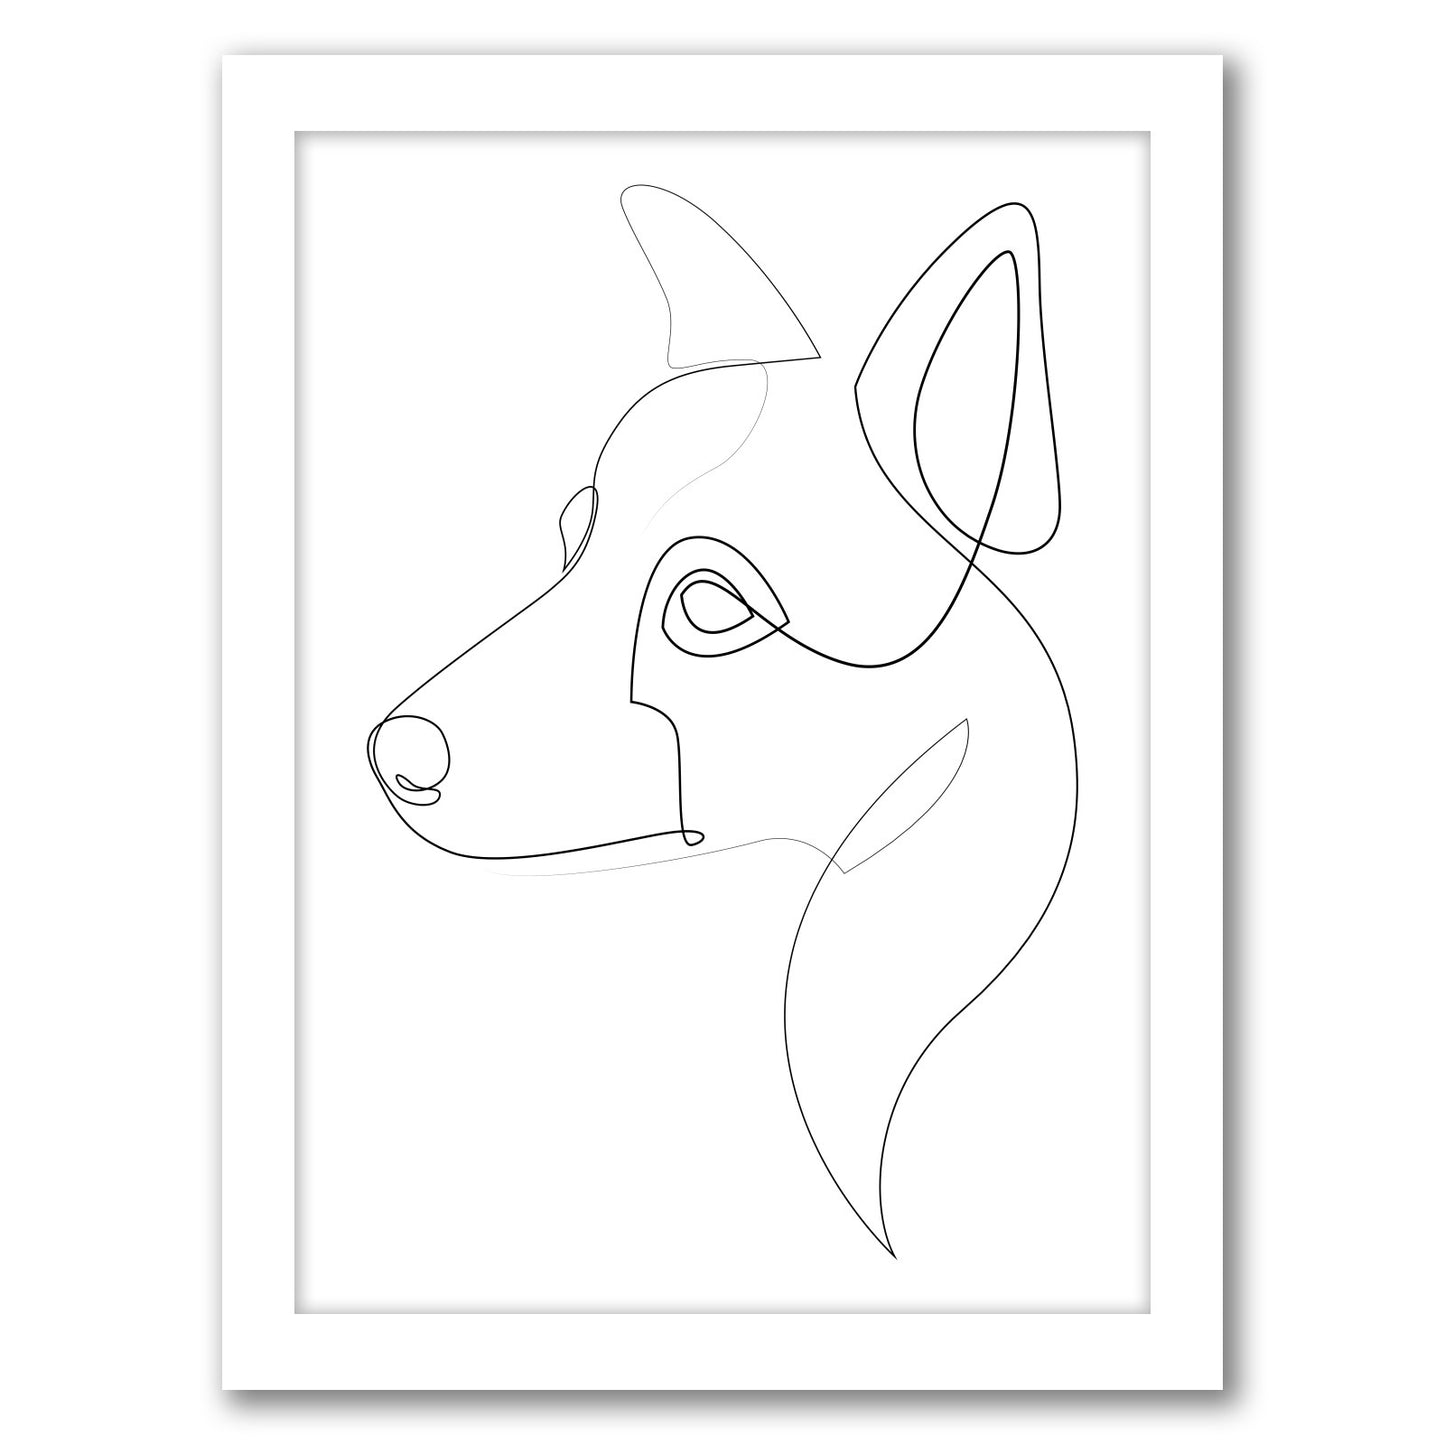 Border Collie One Line by Addillum - Canvas, Poster or Framed Print